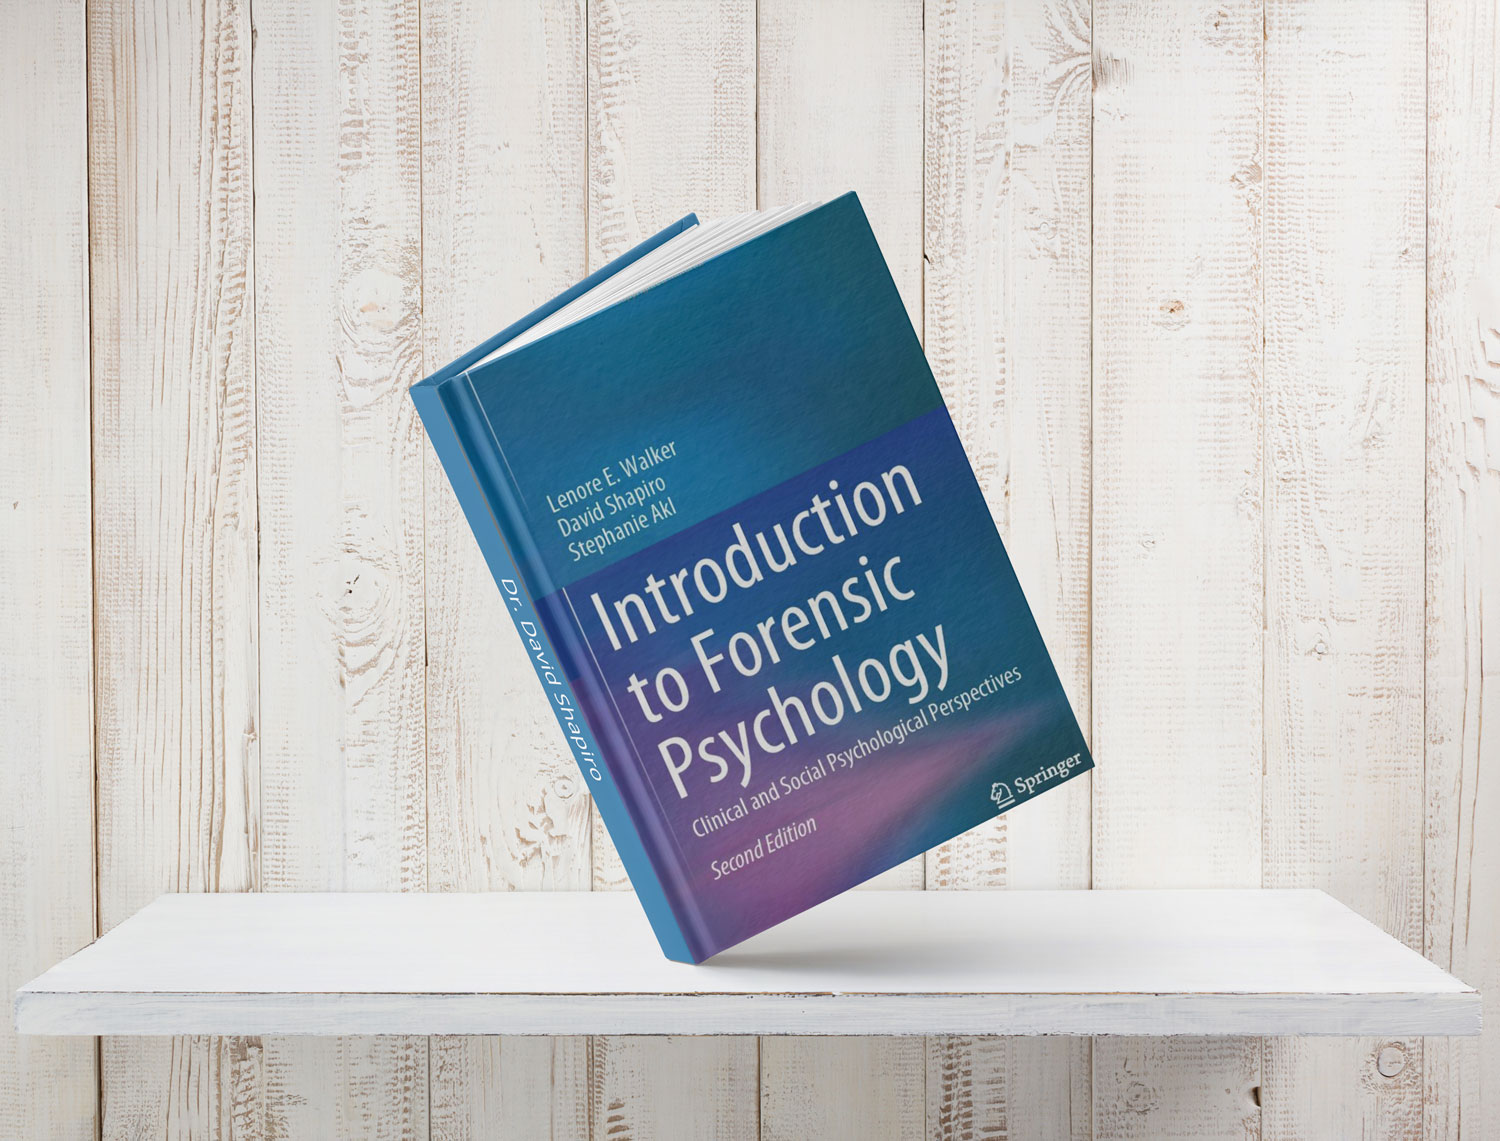 Introduction to Forensic Psychology: Clinical and Social Psychological Perspectives 2nd ed. 2020 Edition